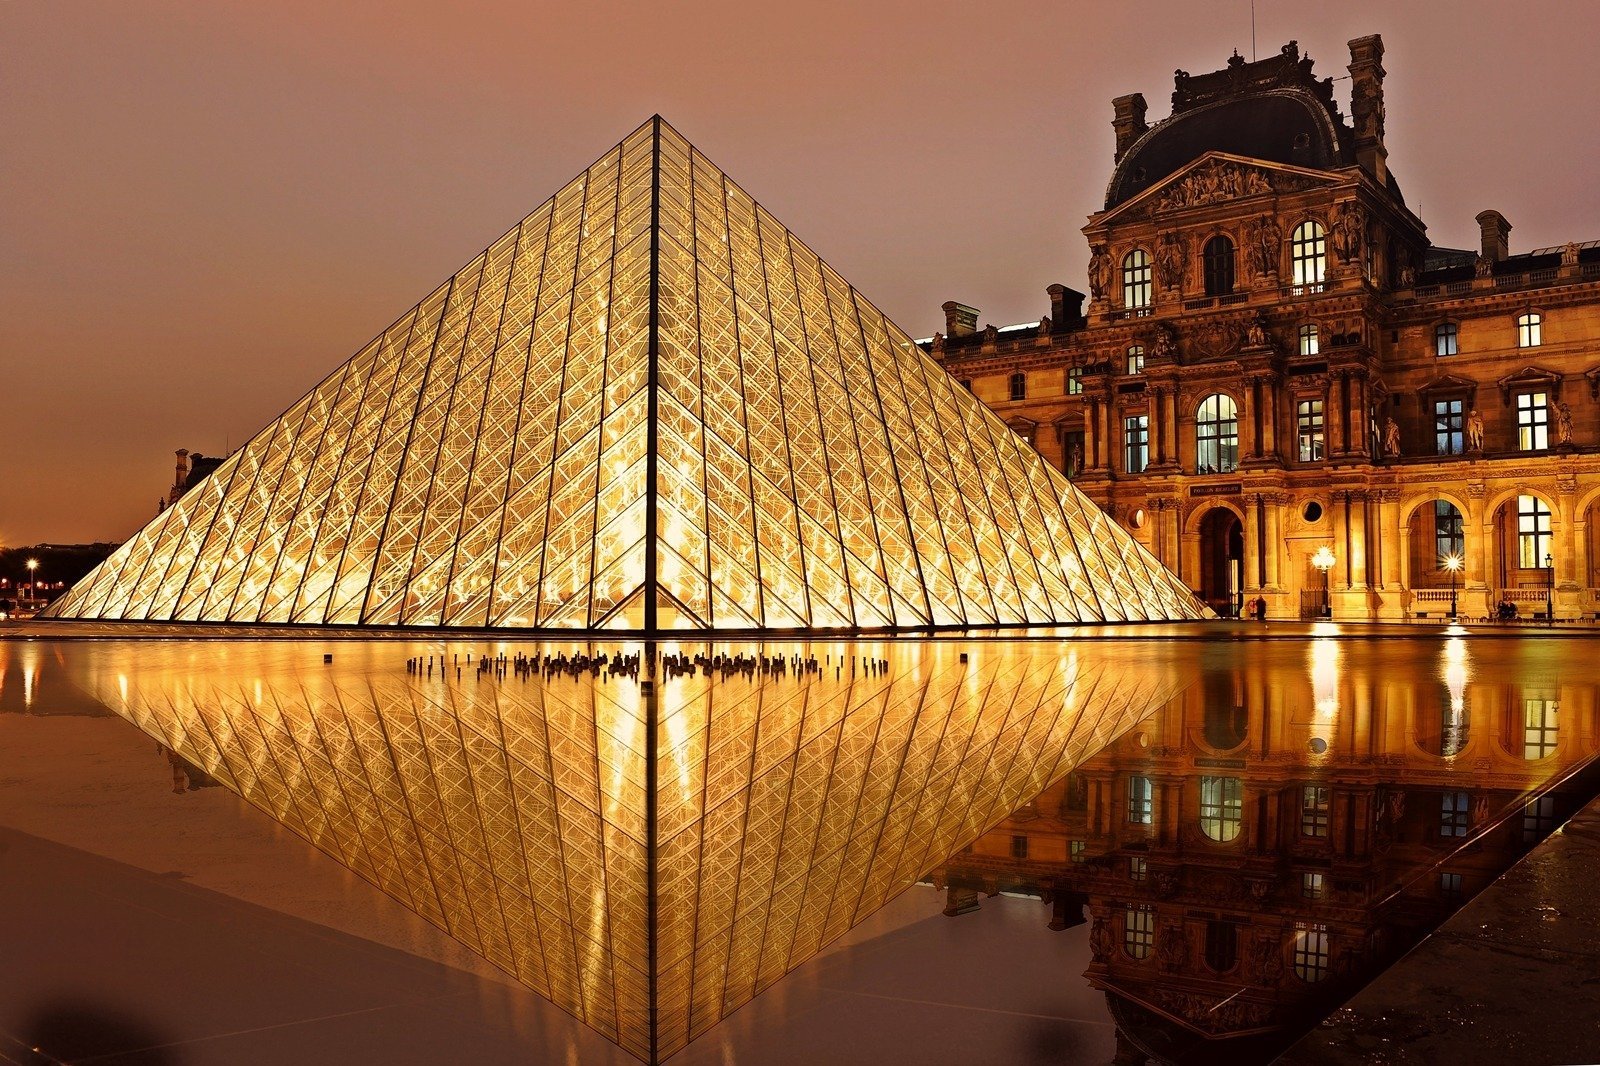 7 Ways to Up Your Architectural Photography Game